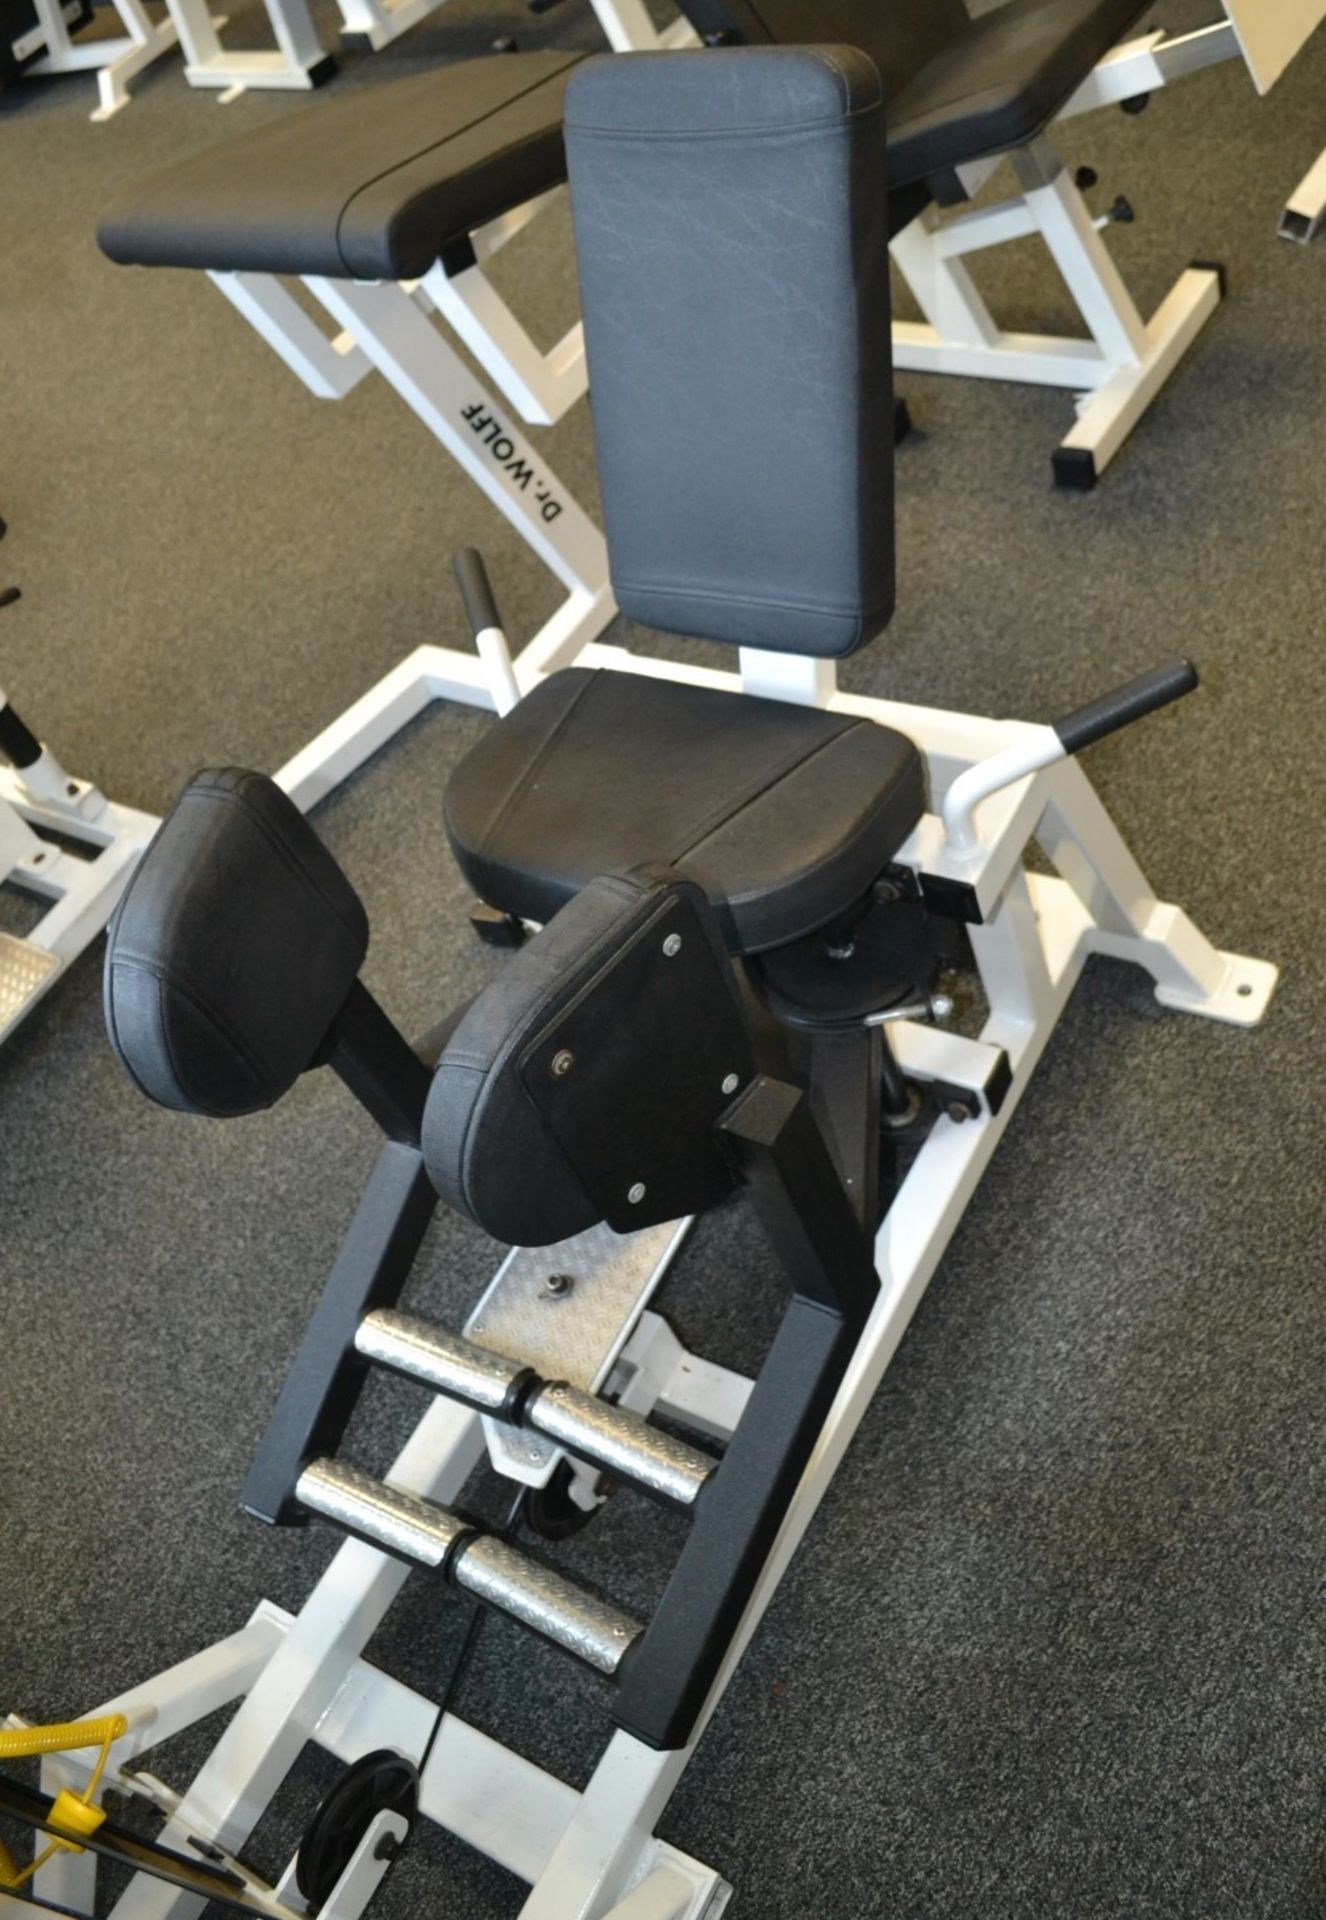 1 x Force Outer Thigh Adductor Pin Loaded Gym Machine With Weights - Ref: J2021/1FG - Image 3 of 4